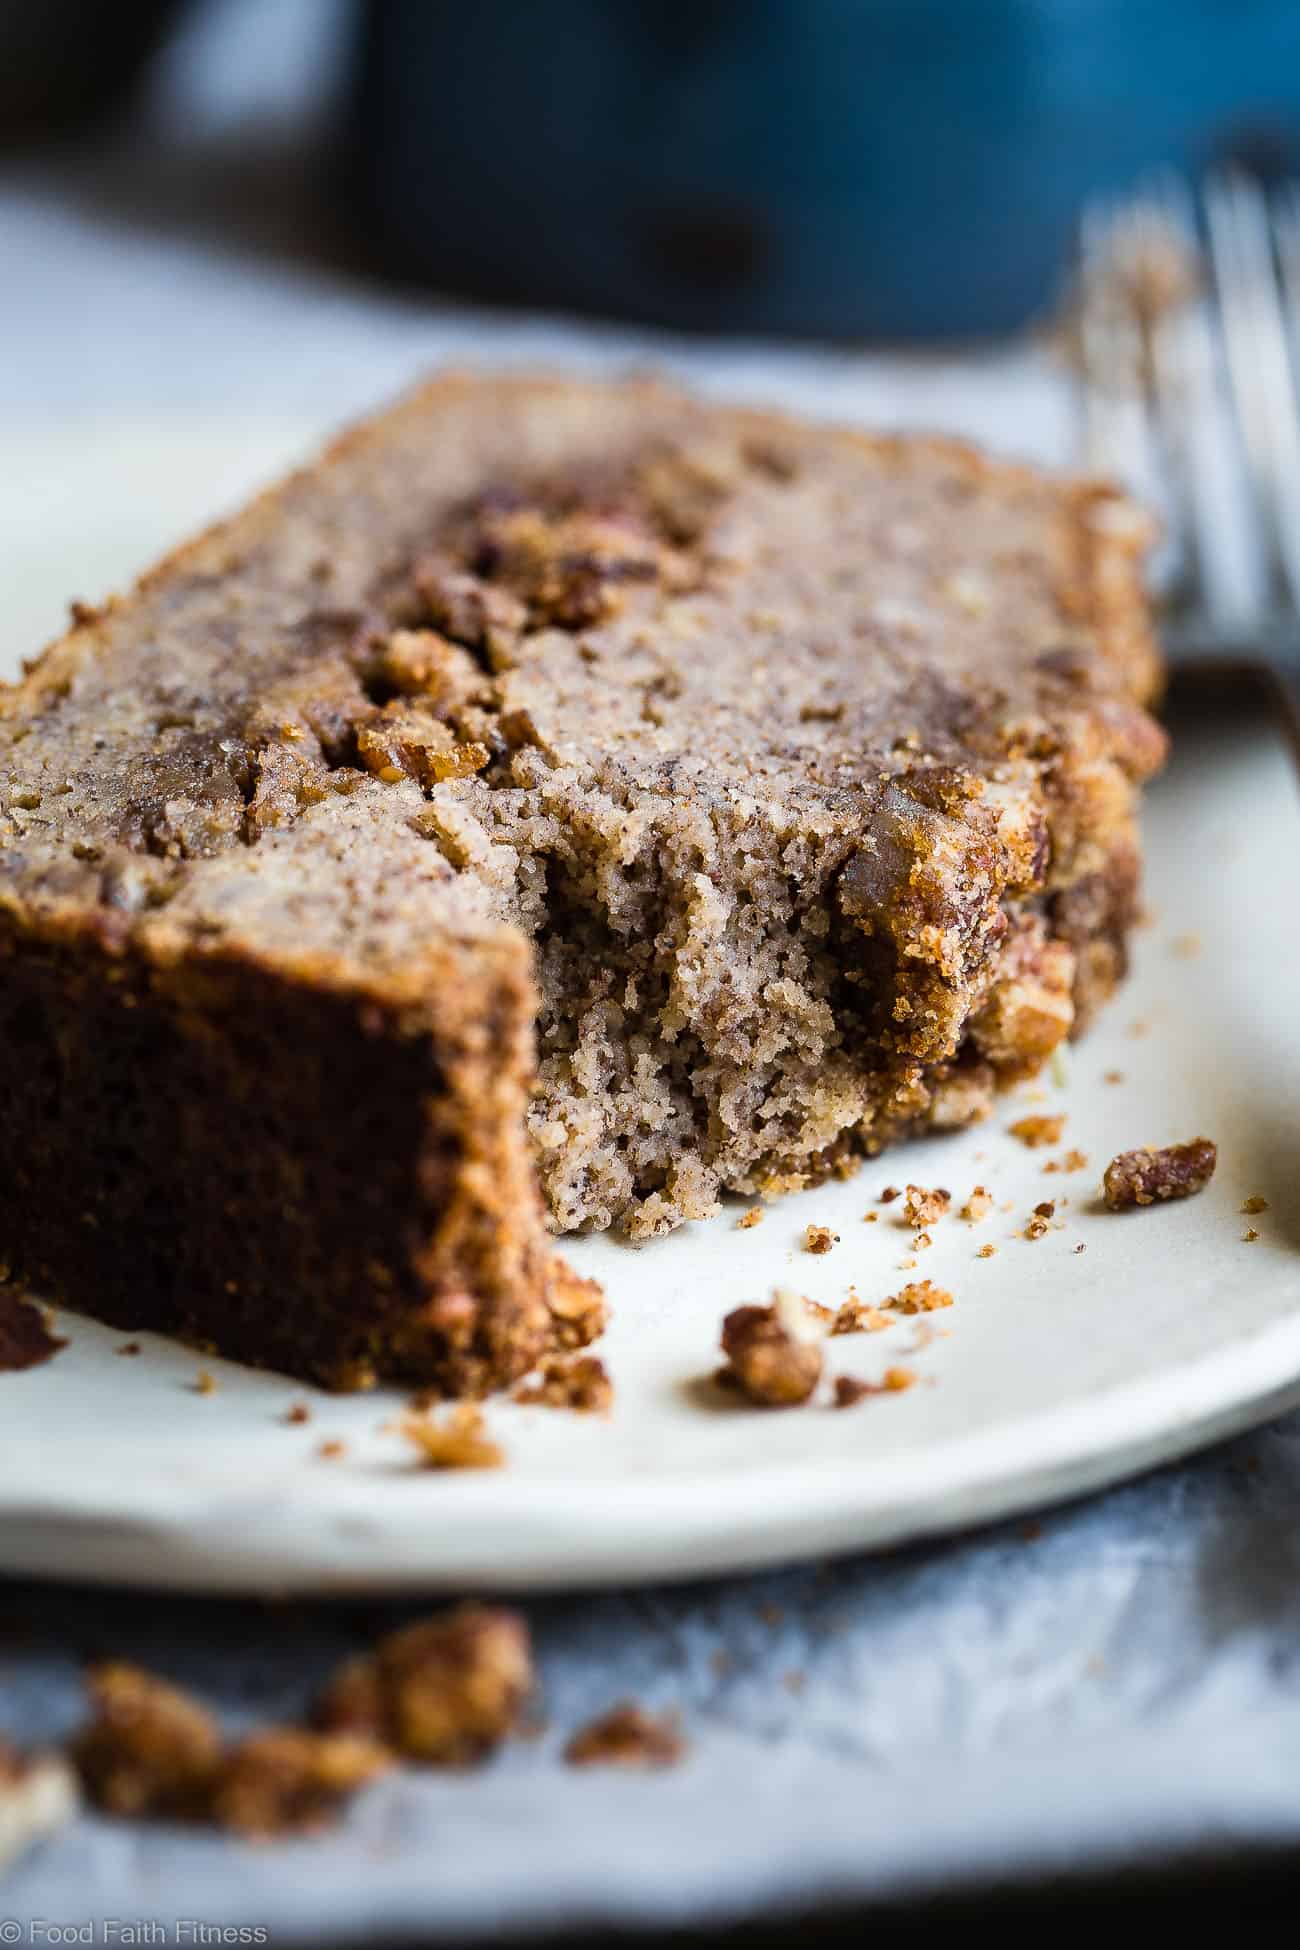 The Best Paleo Banana Bread with Pecan Streusel - This easy Paleo Coconut Flour Banana Bread is gluten/grain/dairy/refined sugar free but perfectly moist and sweet! The pecan topping MAKES it so addicting and you'll never know it's healthy! | Foodfaithfitness.com | @FoodFaithFit